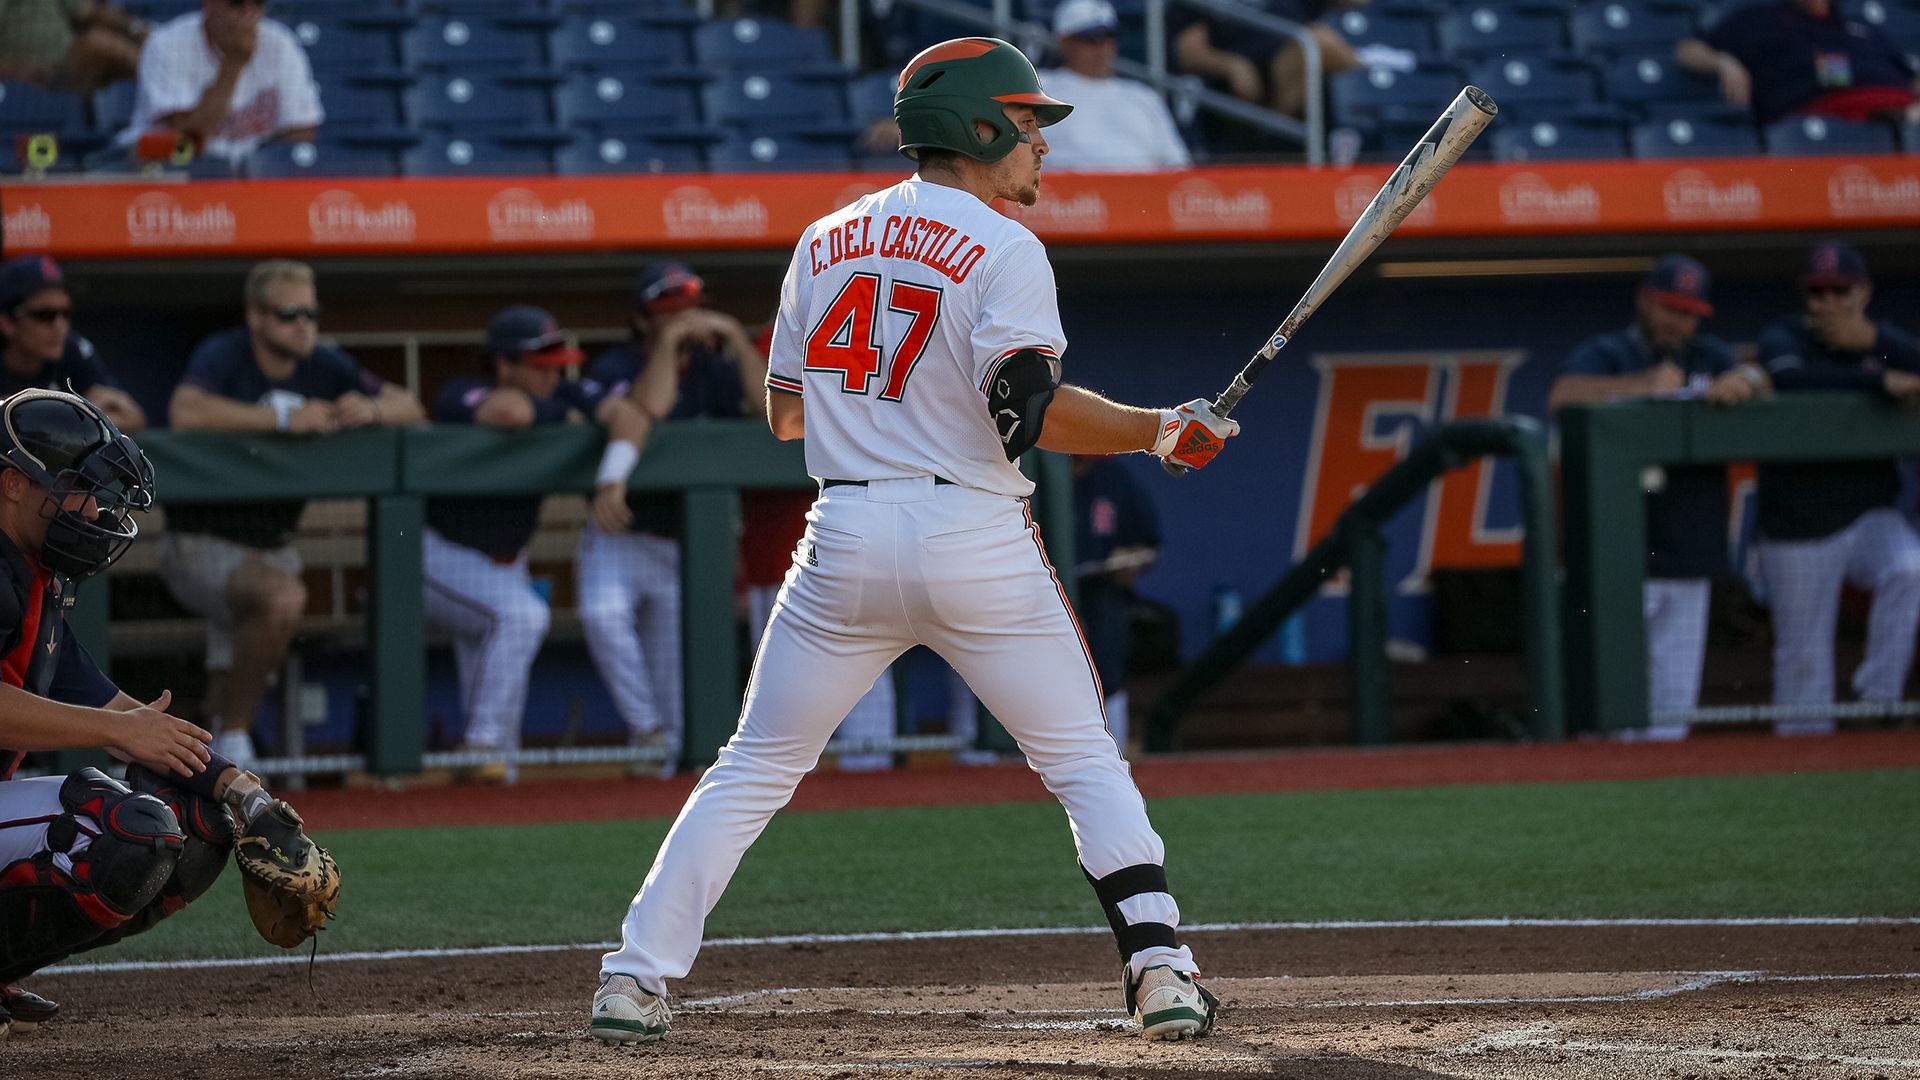 Two Canes Named to ABCA All-Region Team